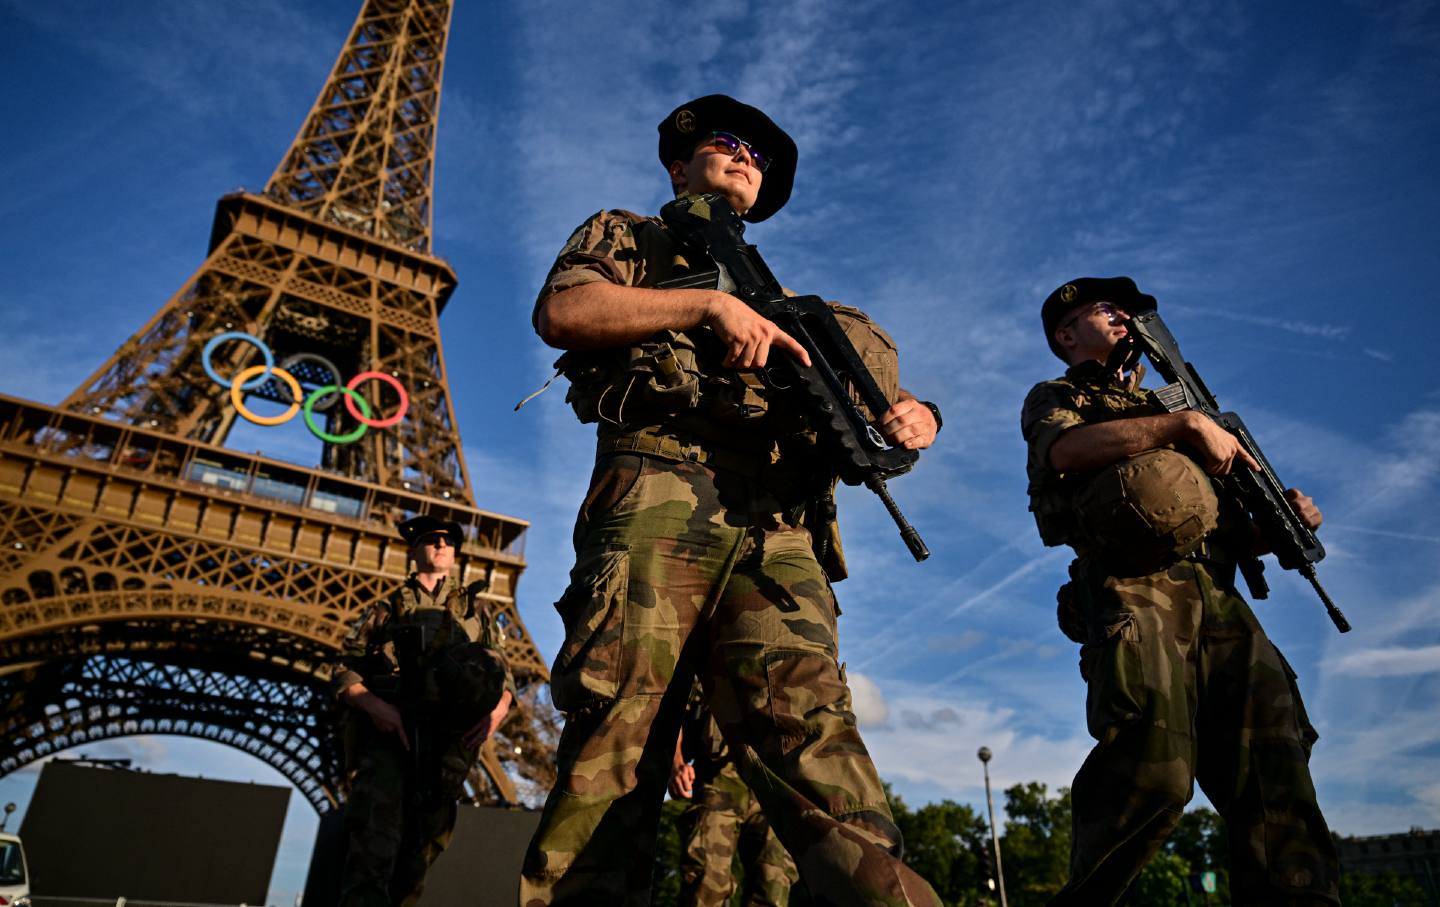 French soldiers stand guard near to Eiffel Tower in Paris on July 21 ahead of the Paris 2024 Olympic and Paralympic Games.